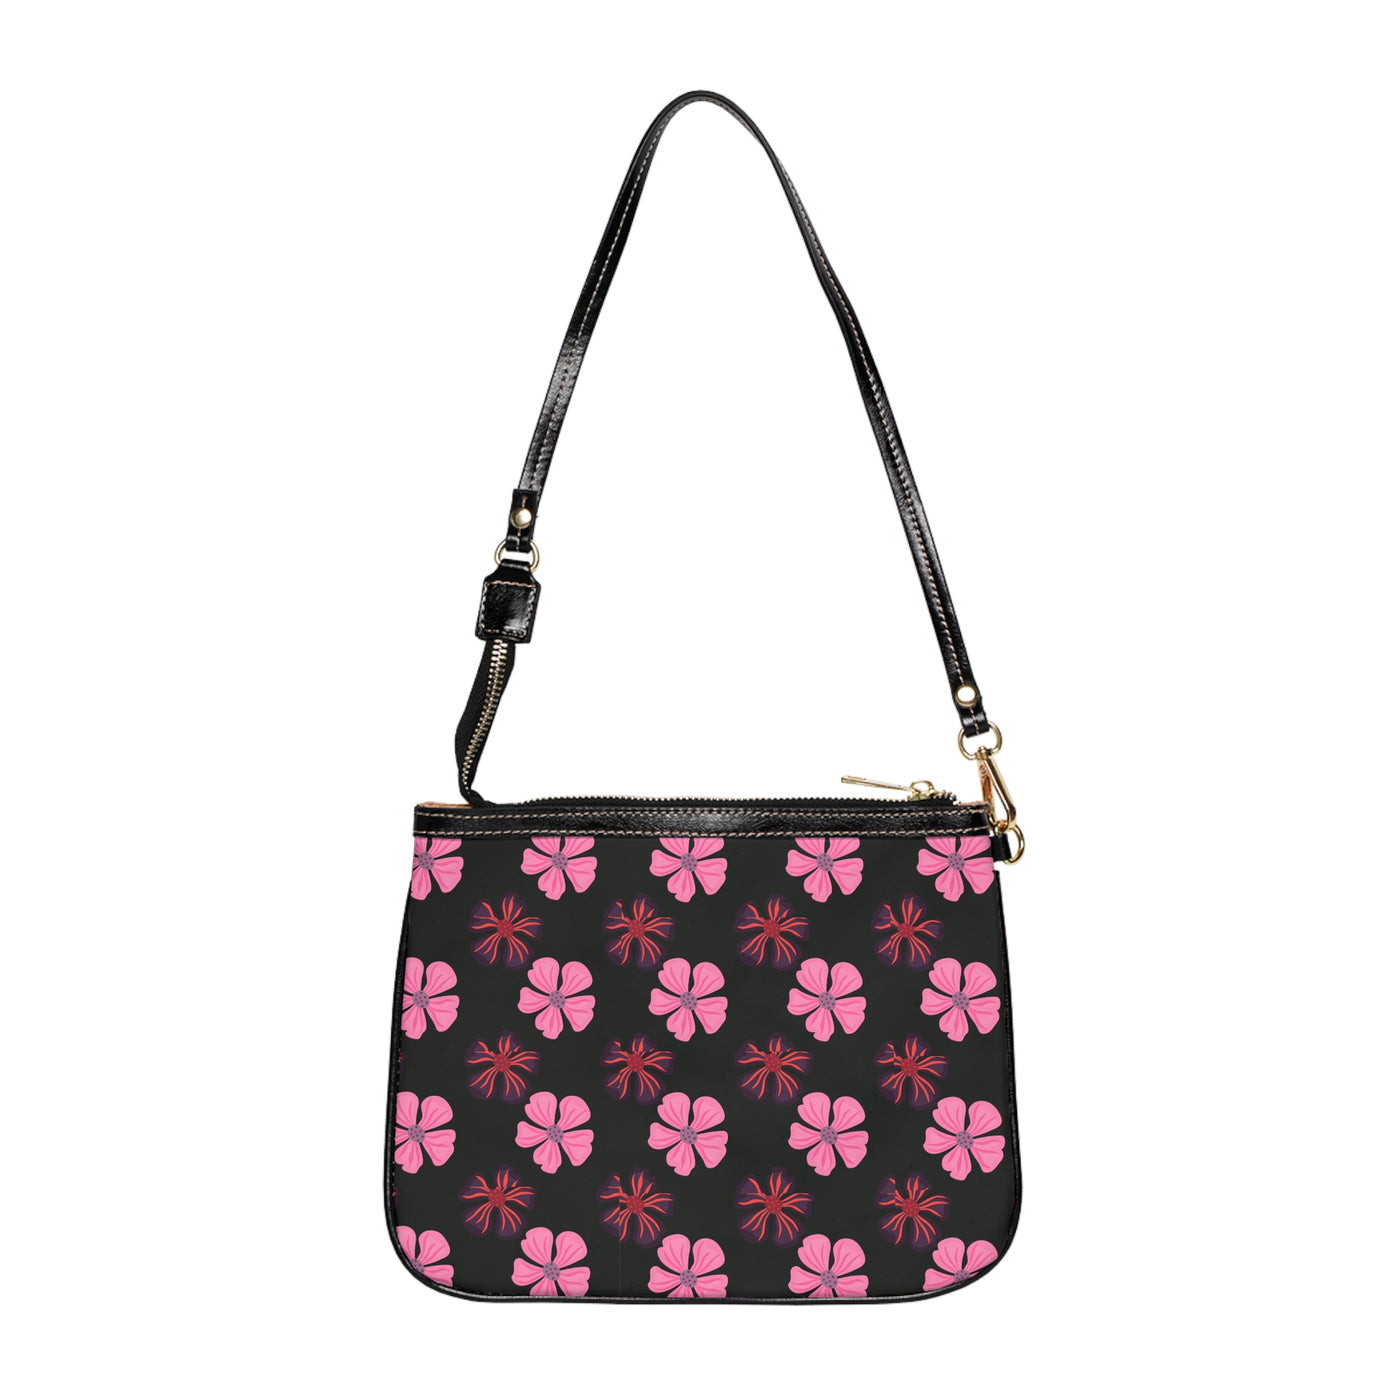 PINK CHAMOMILE Small Shoulder Bag PU Leather